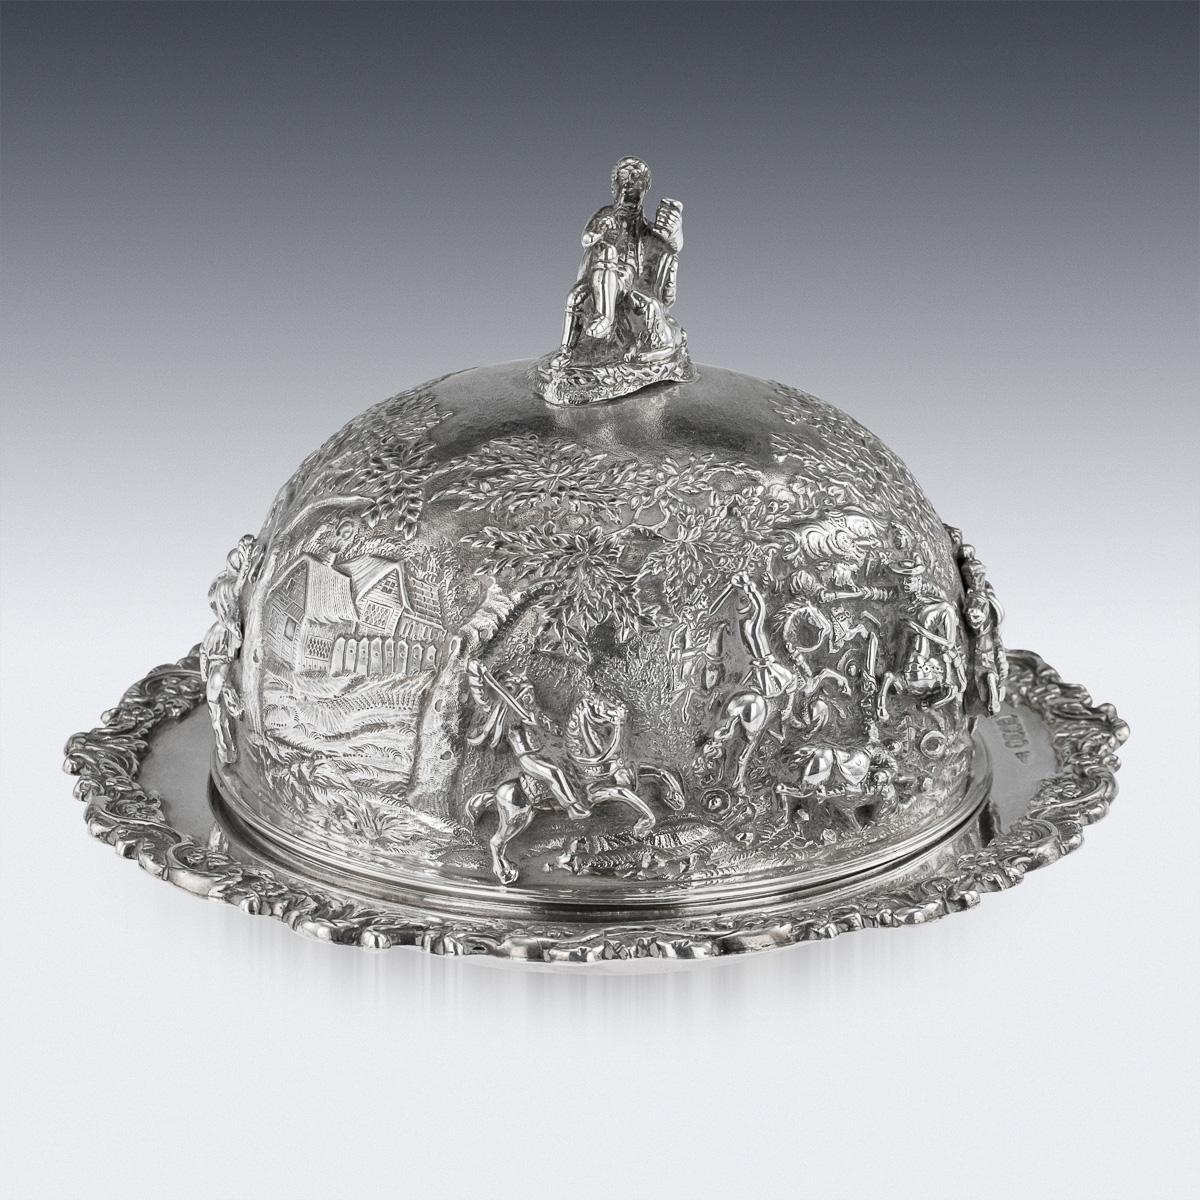 Antique 19th century Georgian solid silver muffin dish, of outstanding quality, the domed cover profusely chased and applied with battles scenes in high relief, the finial modelled as a man with clay pipe seated against a barrel, decorated